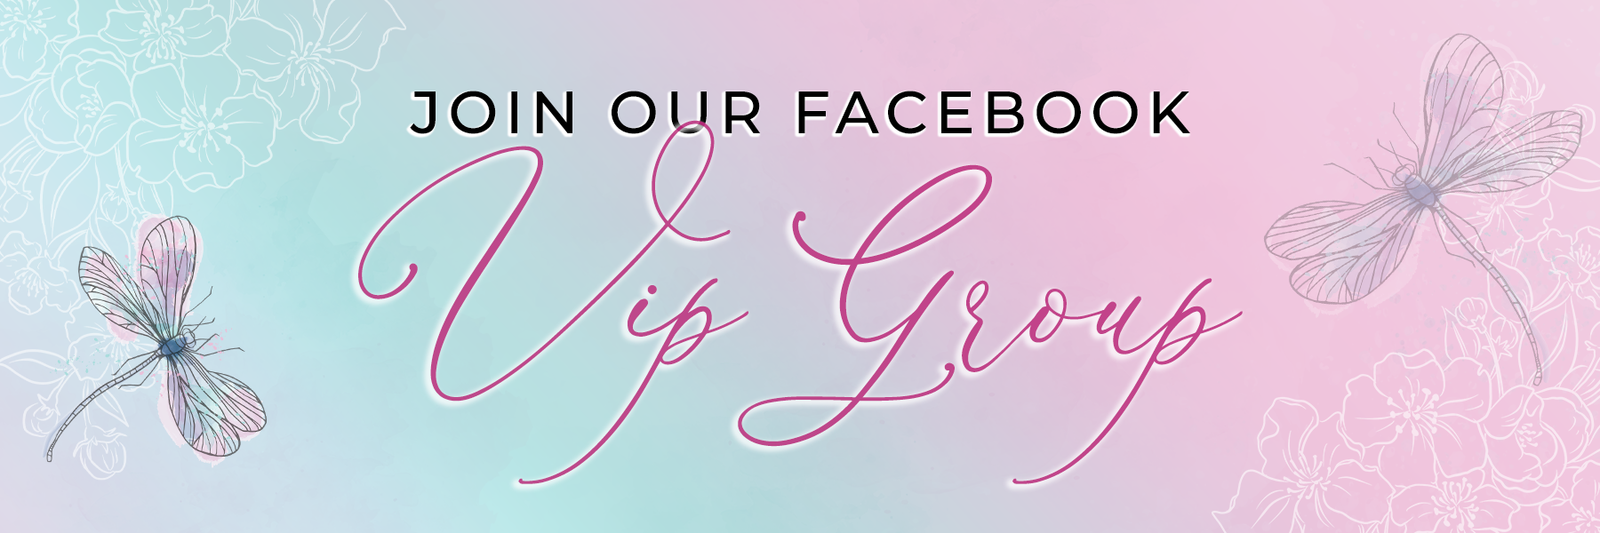 Join our Facebook VIP Group | Vintage Dragonfly Boutique | Women's Fashion Boutique Located in Sumrall, MS